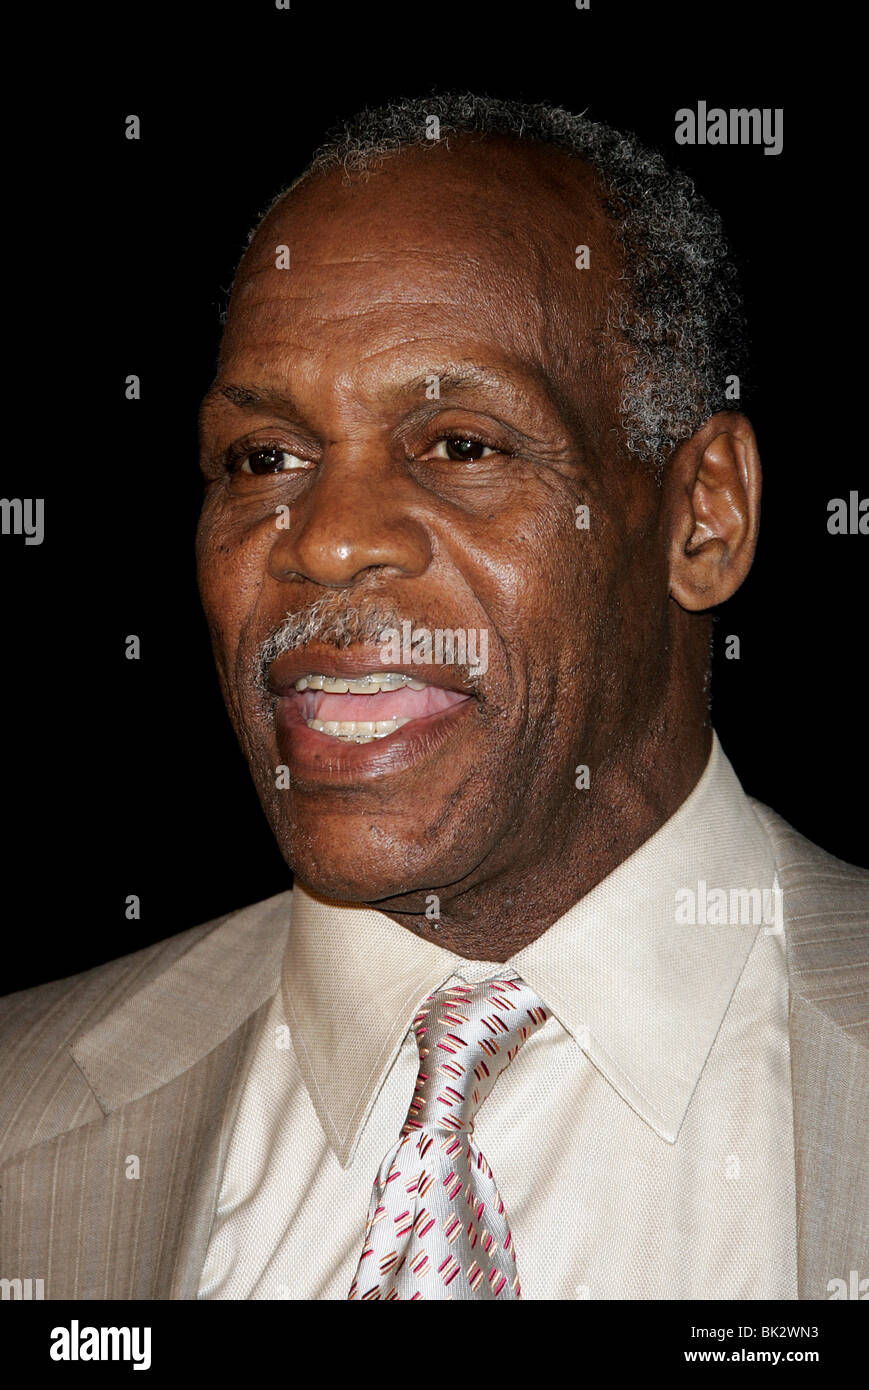 DANNY GLOVER SHOOTER PREMIERE LOS ANGELES WESTWOOD LOS ANGELES USA 08 Mars 2007 Banque D'Images